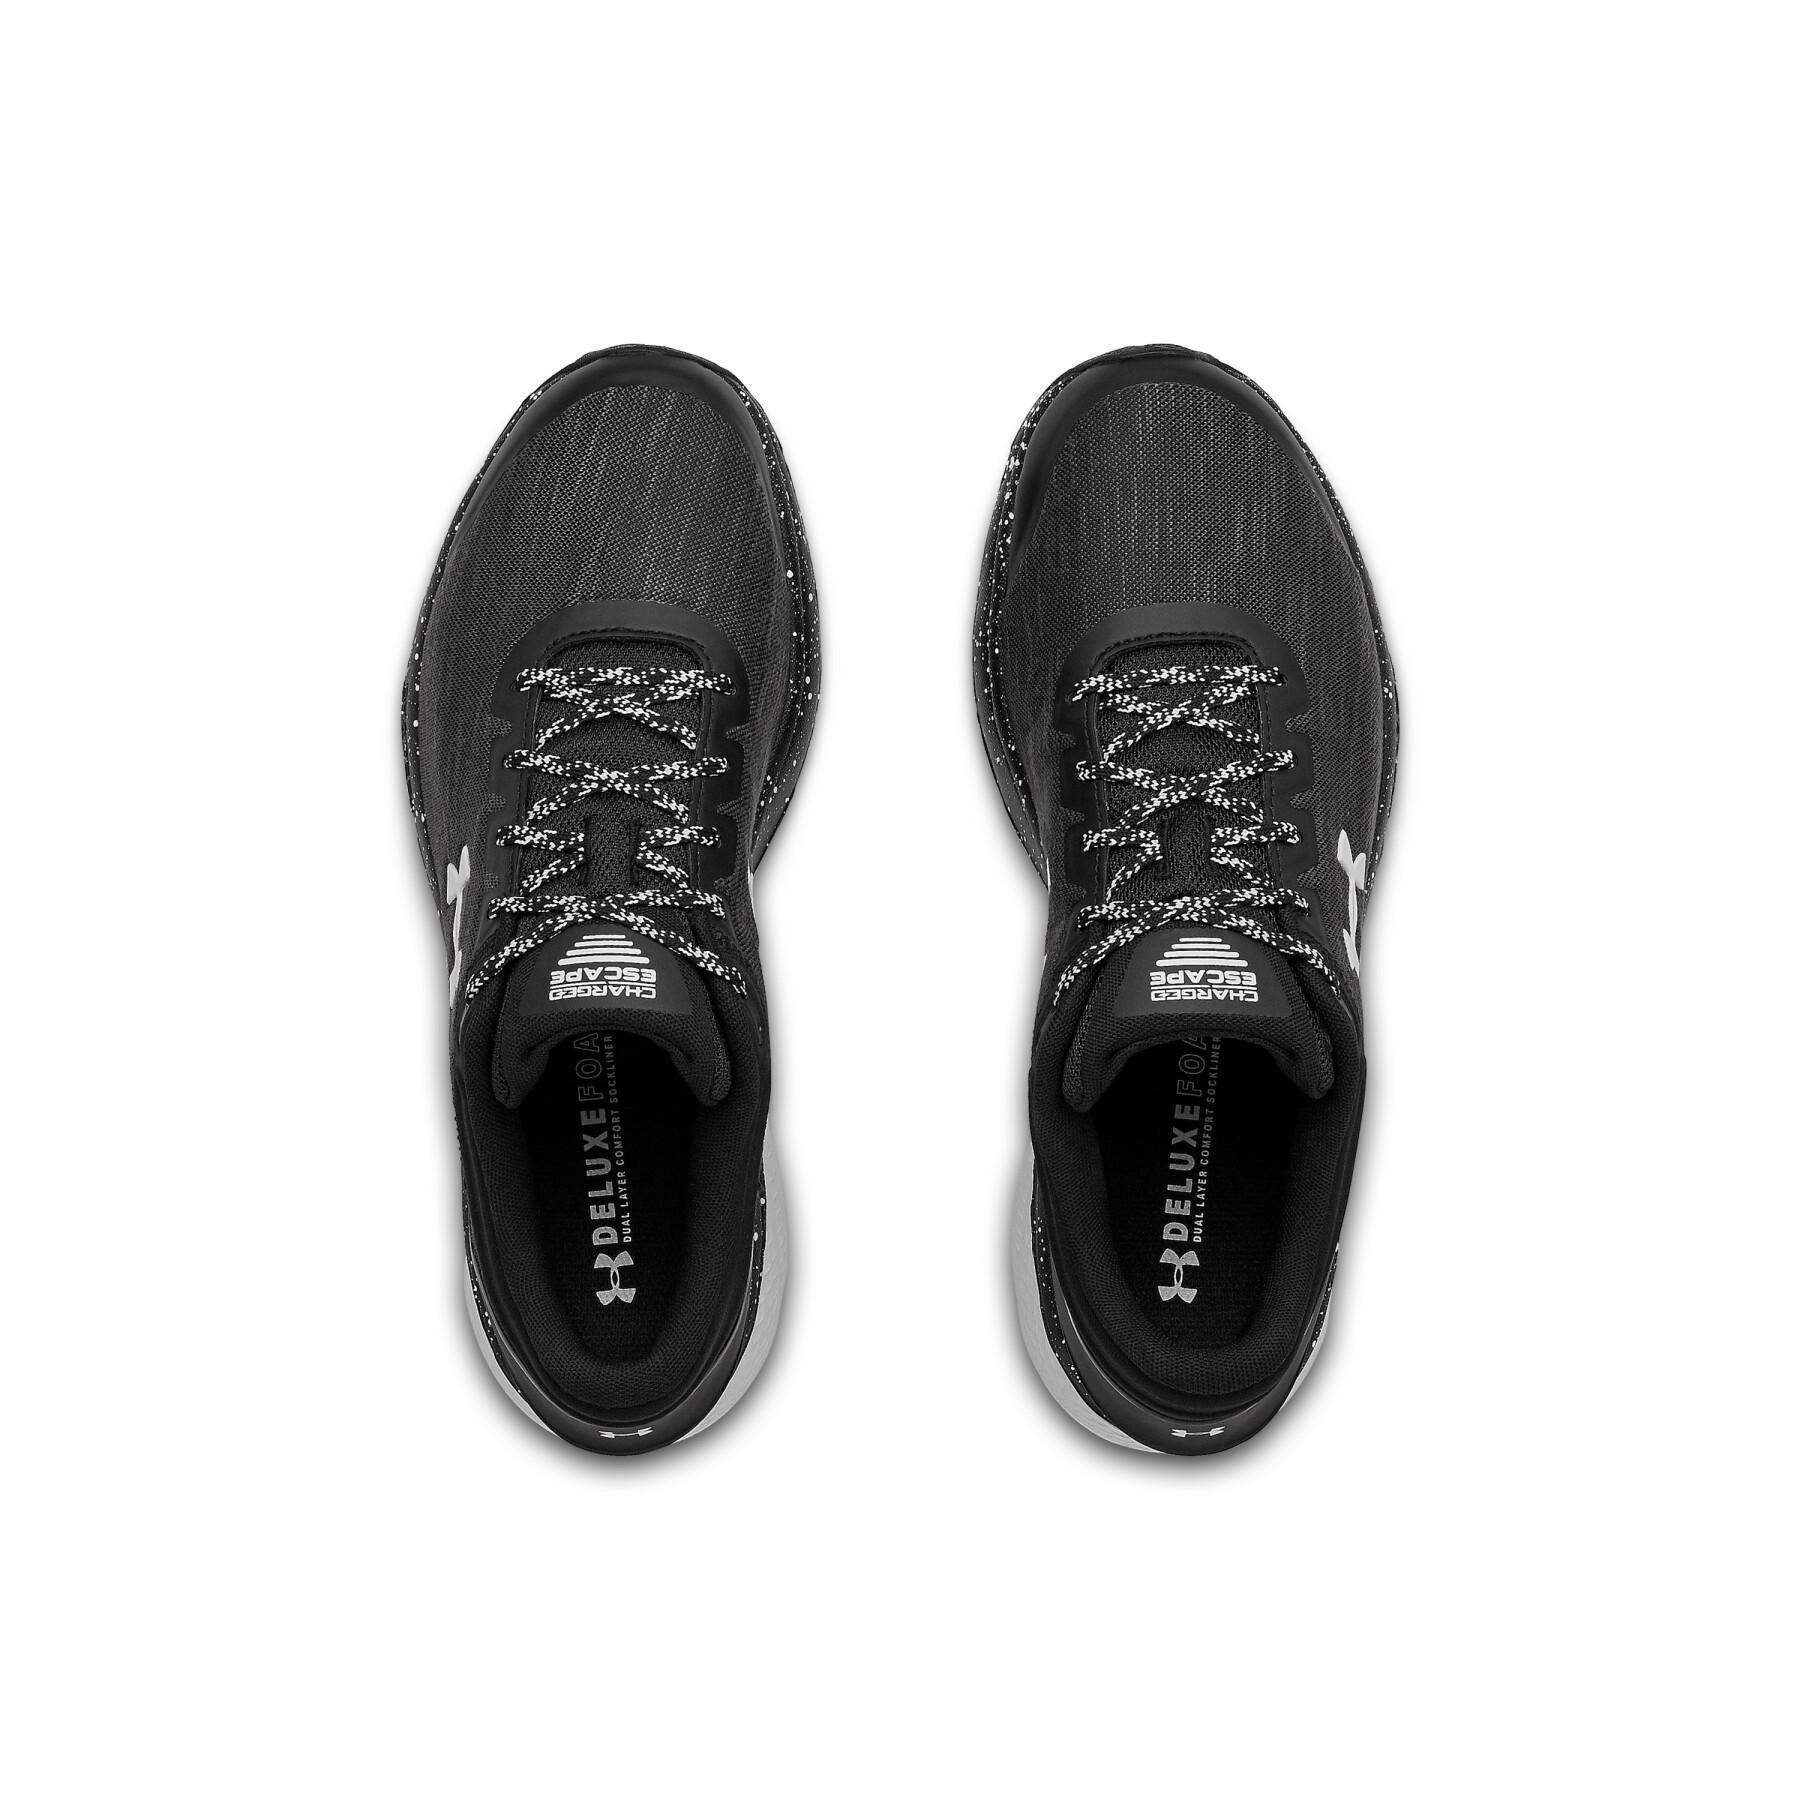 Running shoes Under Armour Charged Escape 3 Evo